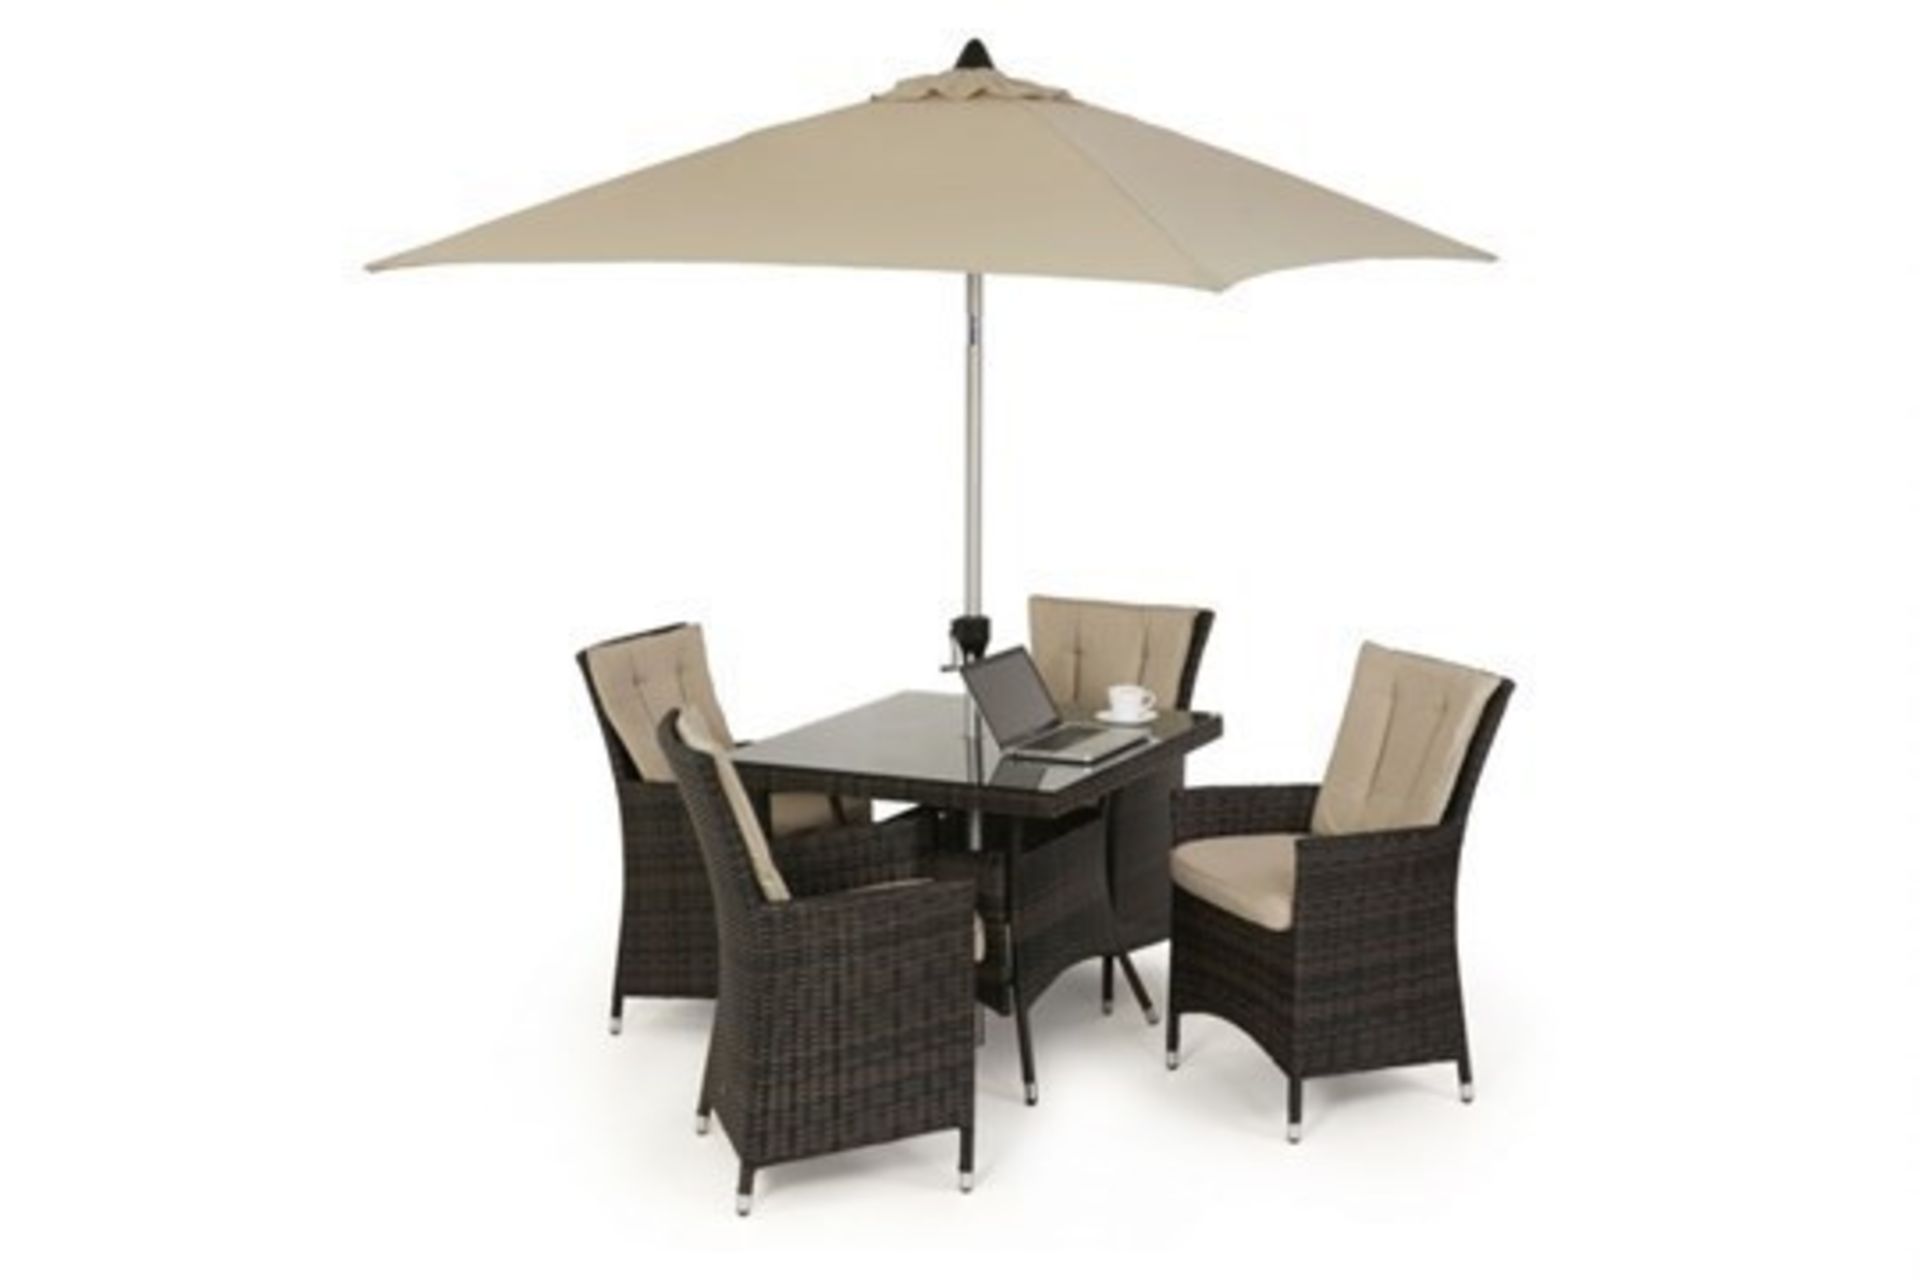 Rattan LA 4 Seat Square Outdoor Dining Set (Brown) *BRAND NEW*